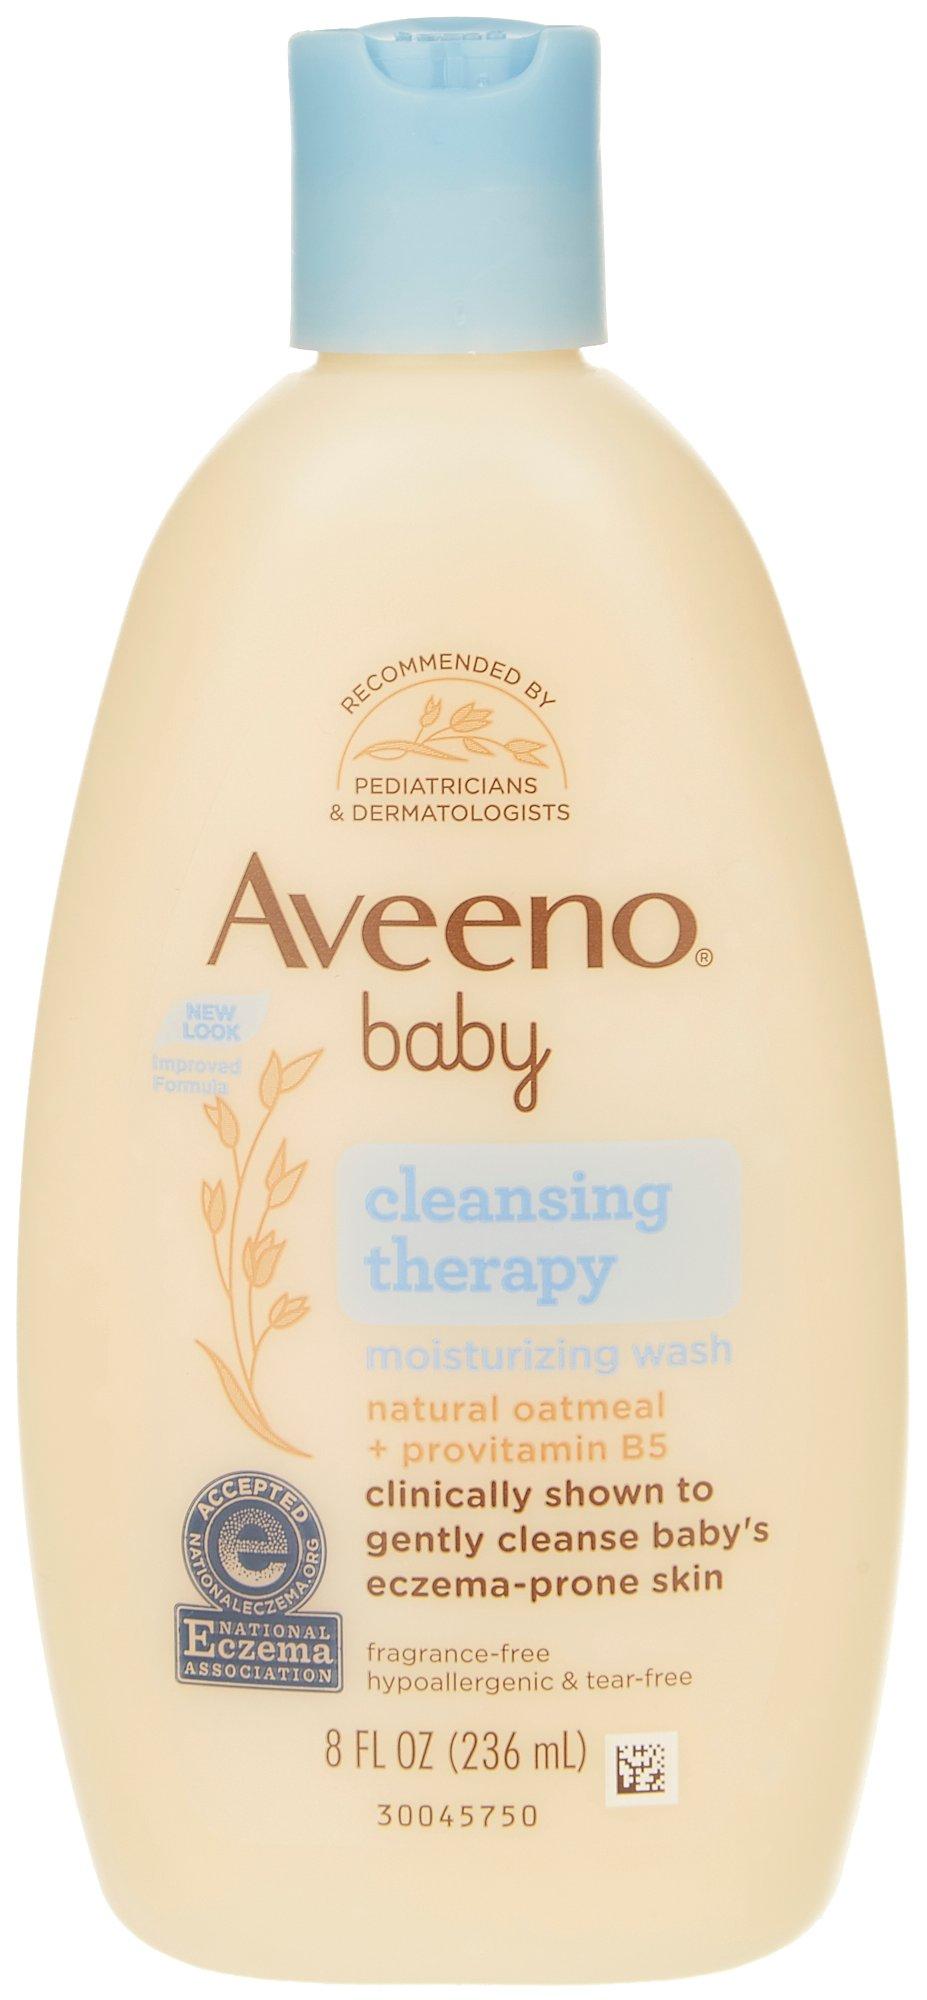 18 Fl.Oz.Cleansing Therapy Eczema Baby Lotion